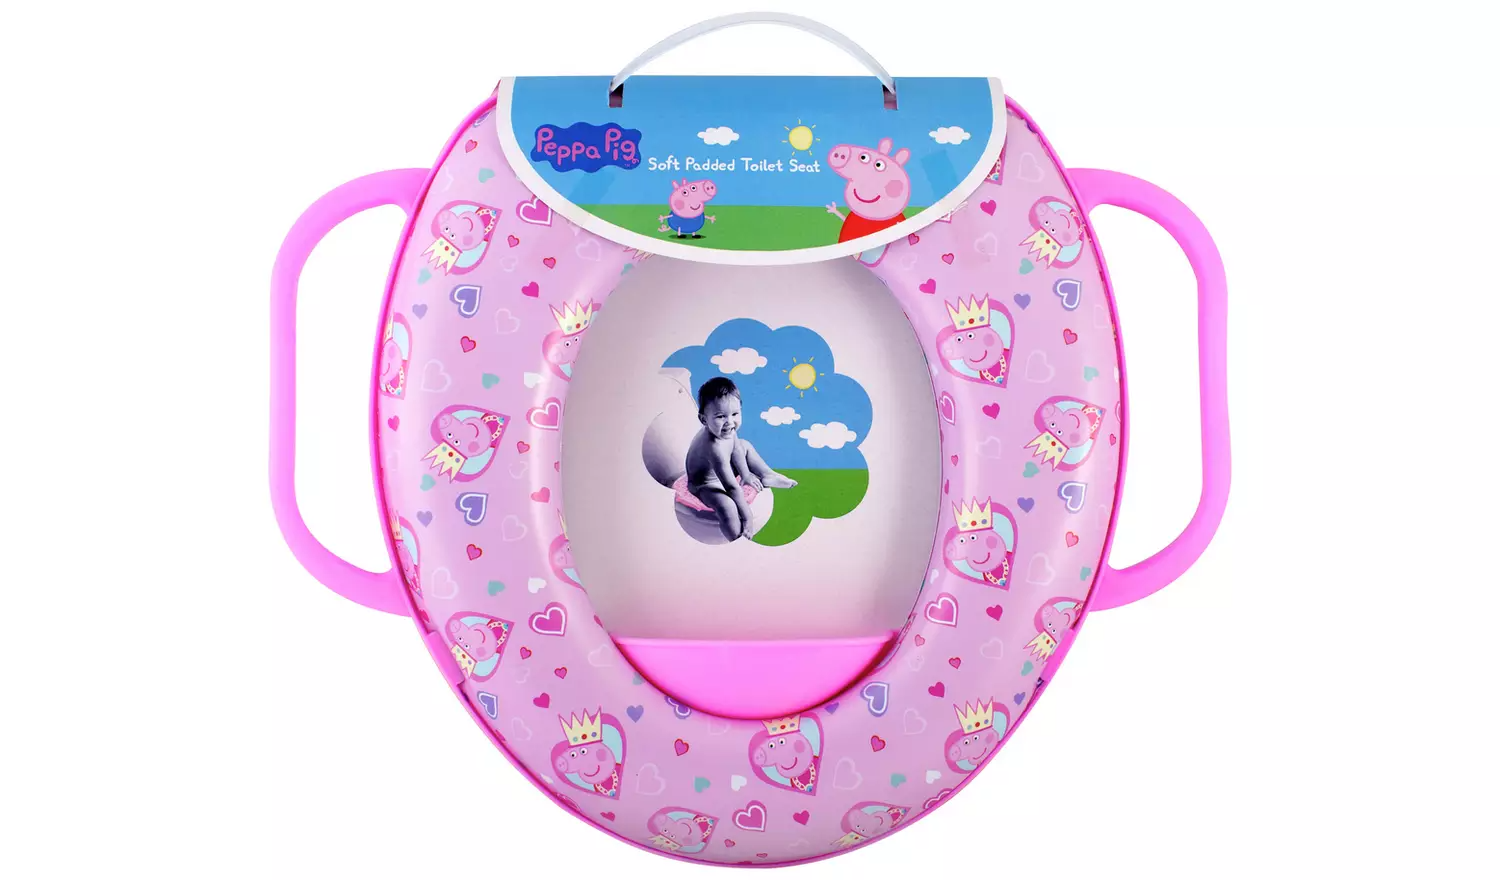 Peppa Pig Soft Padded Toilet Trainer Seat